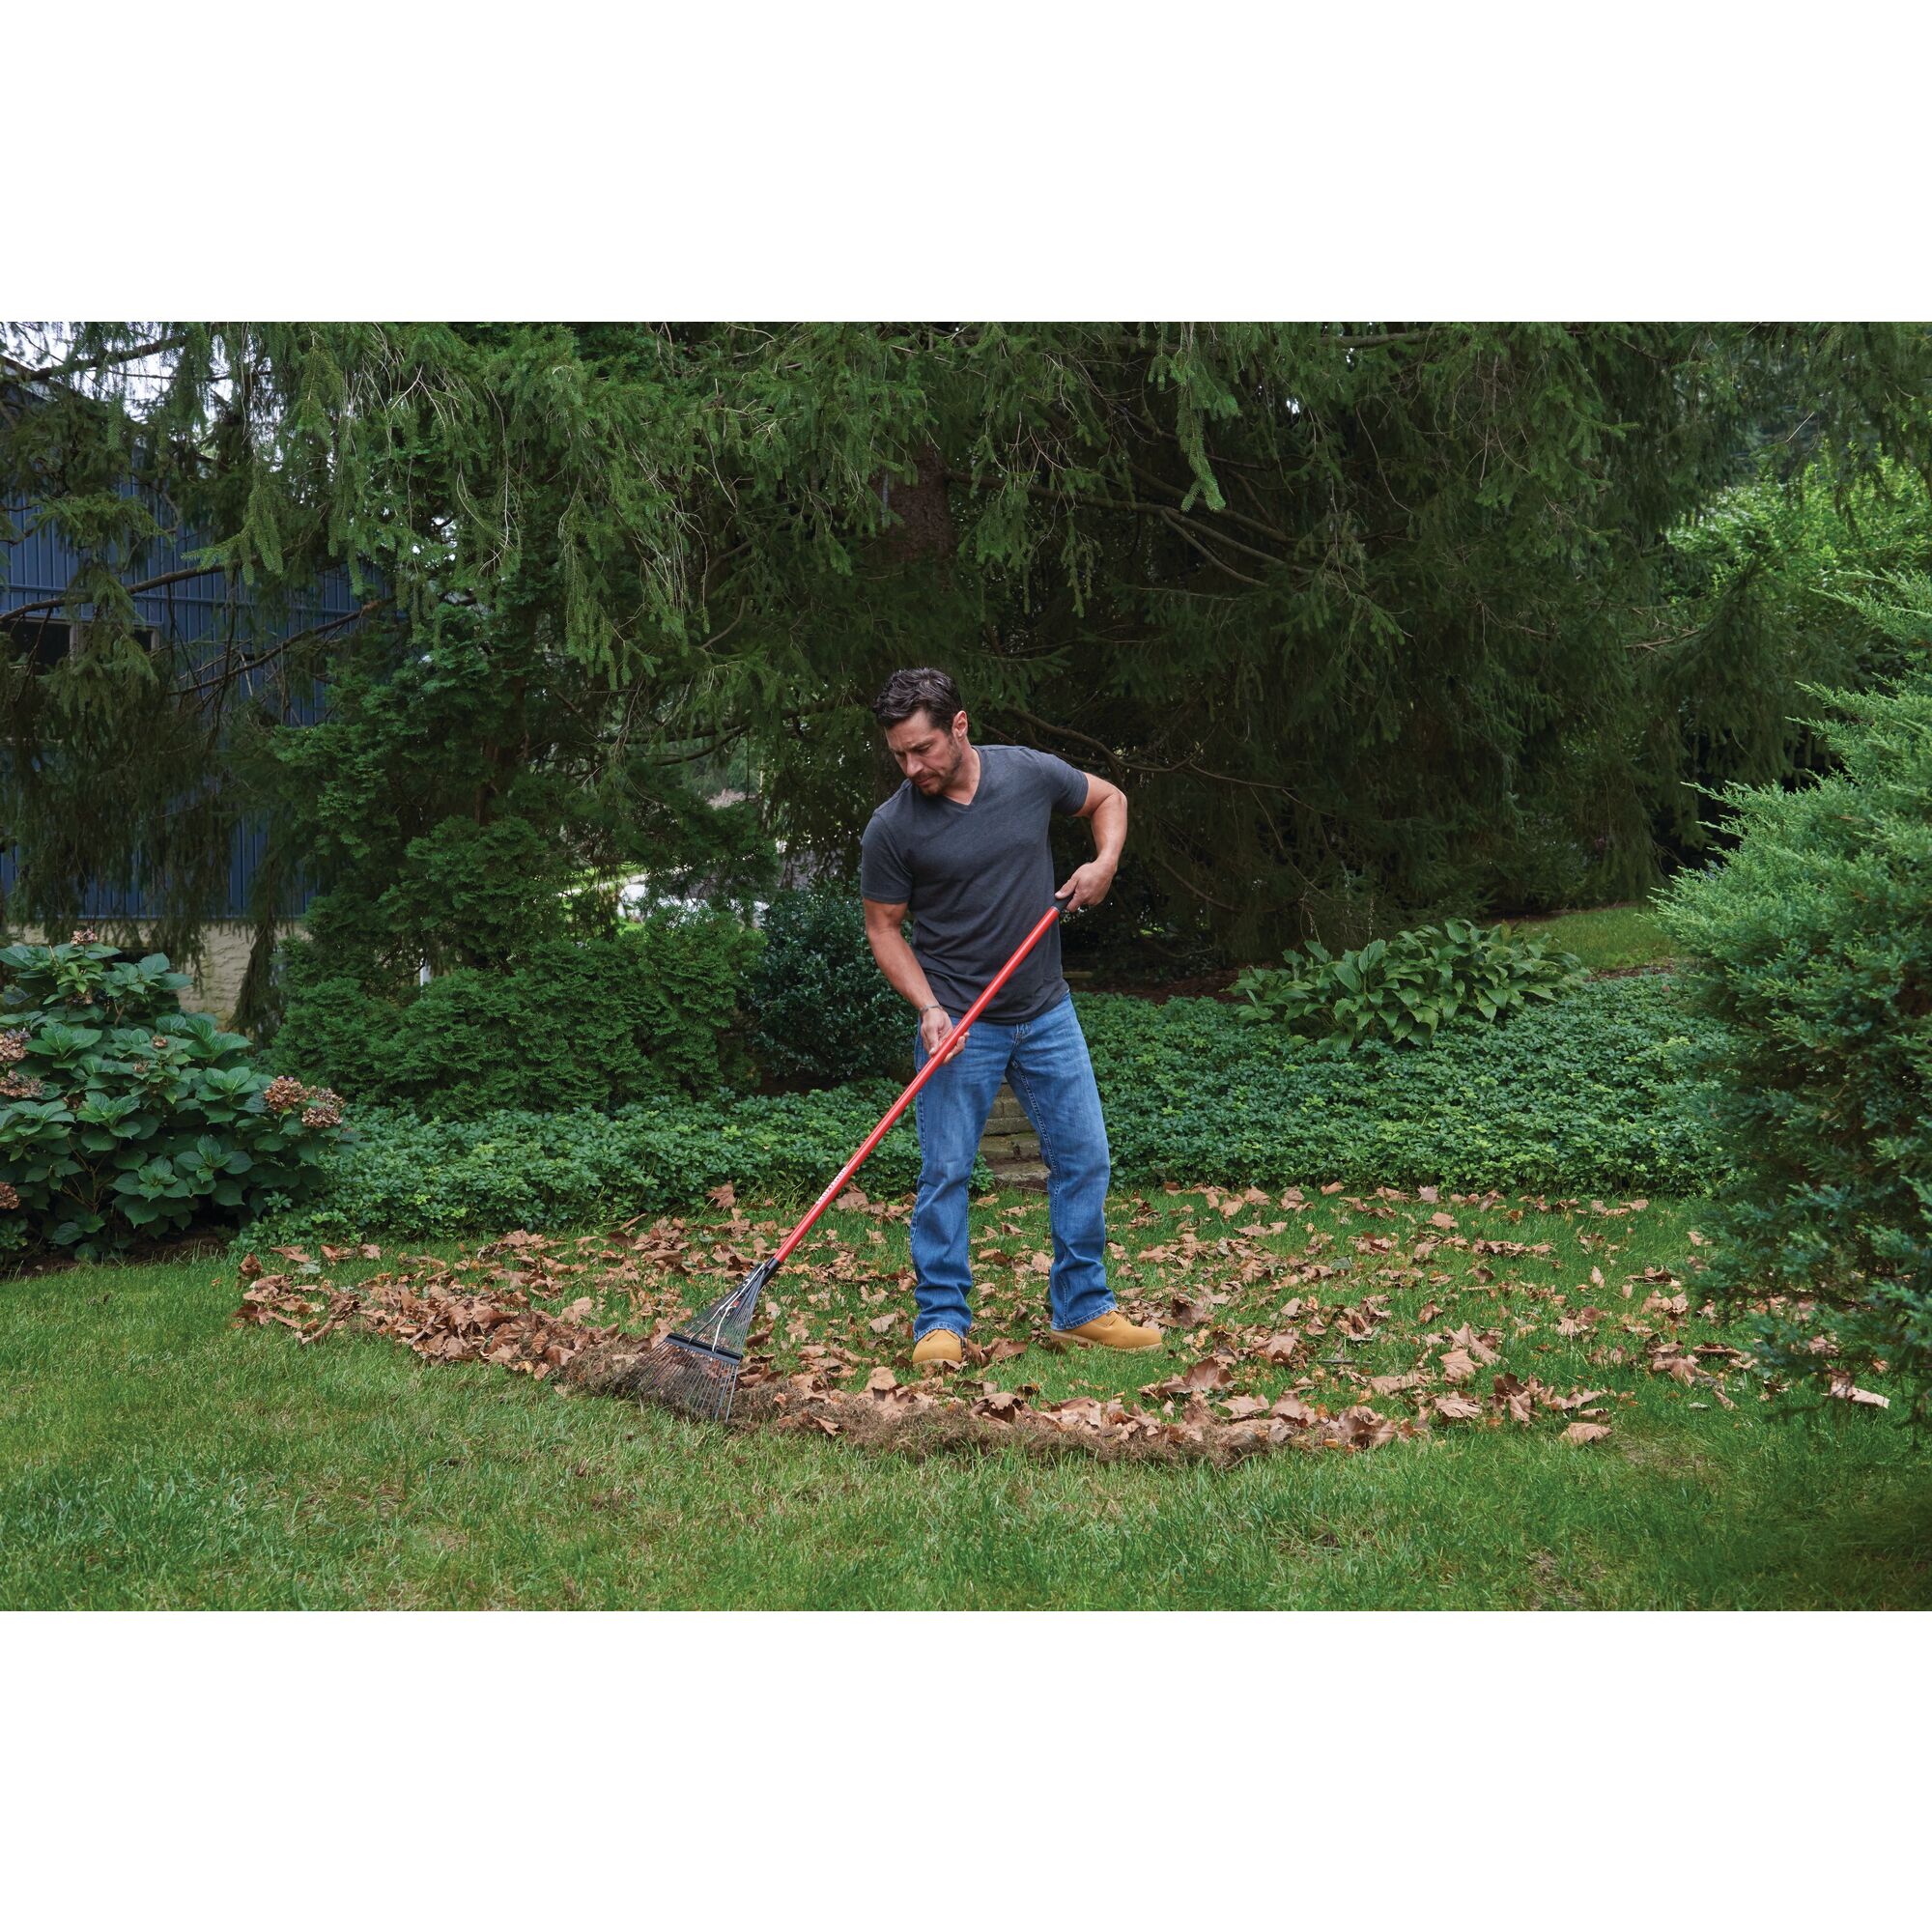 24 inch tine fiberglass handle lawn rake being used by a person.